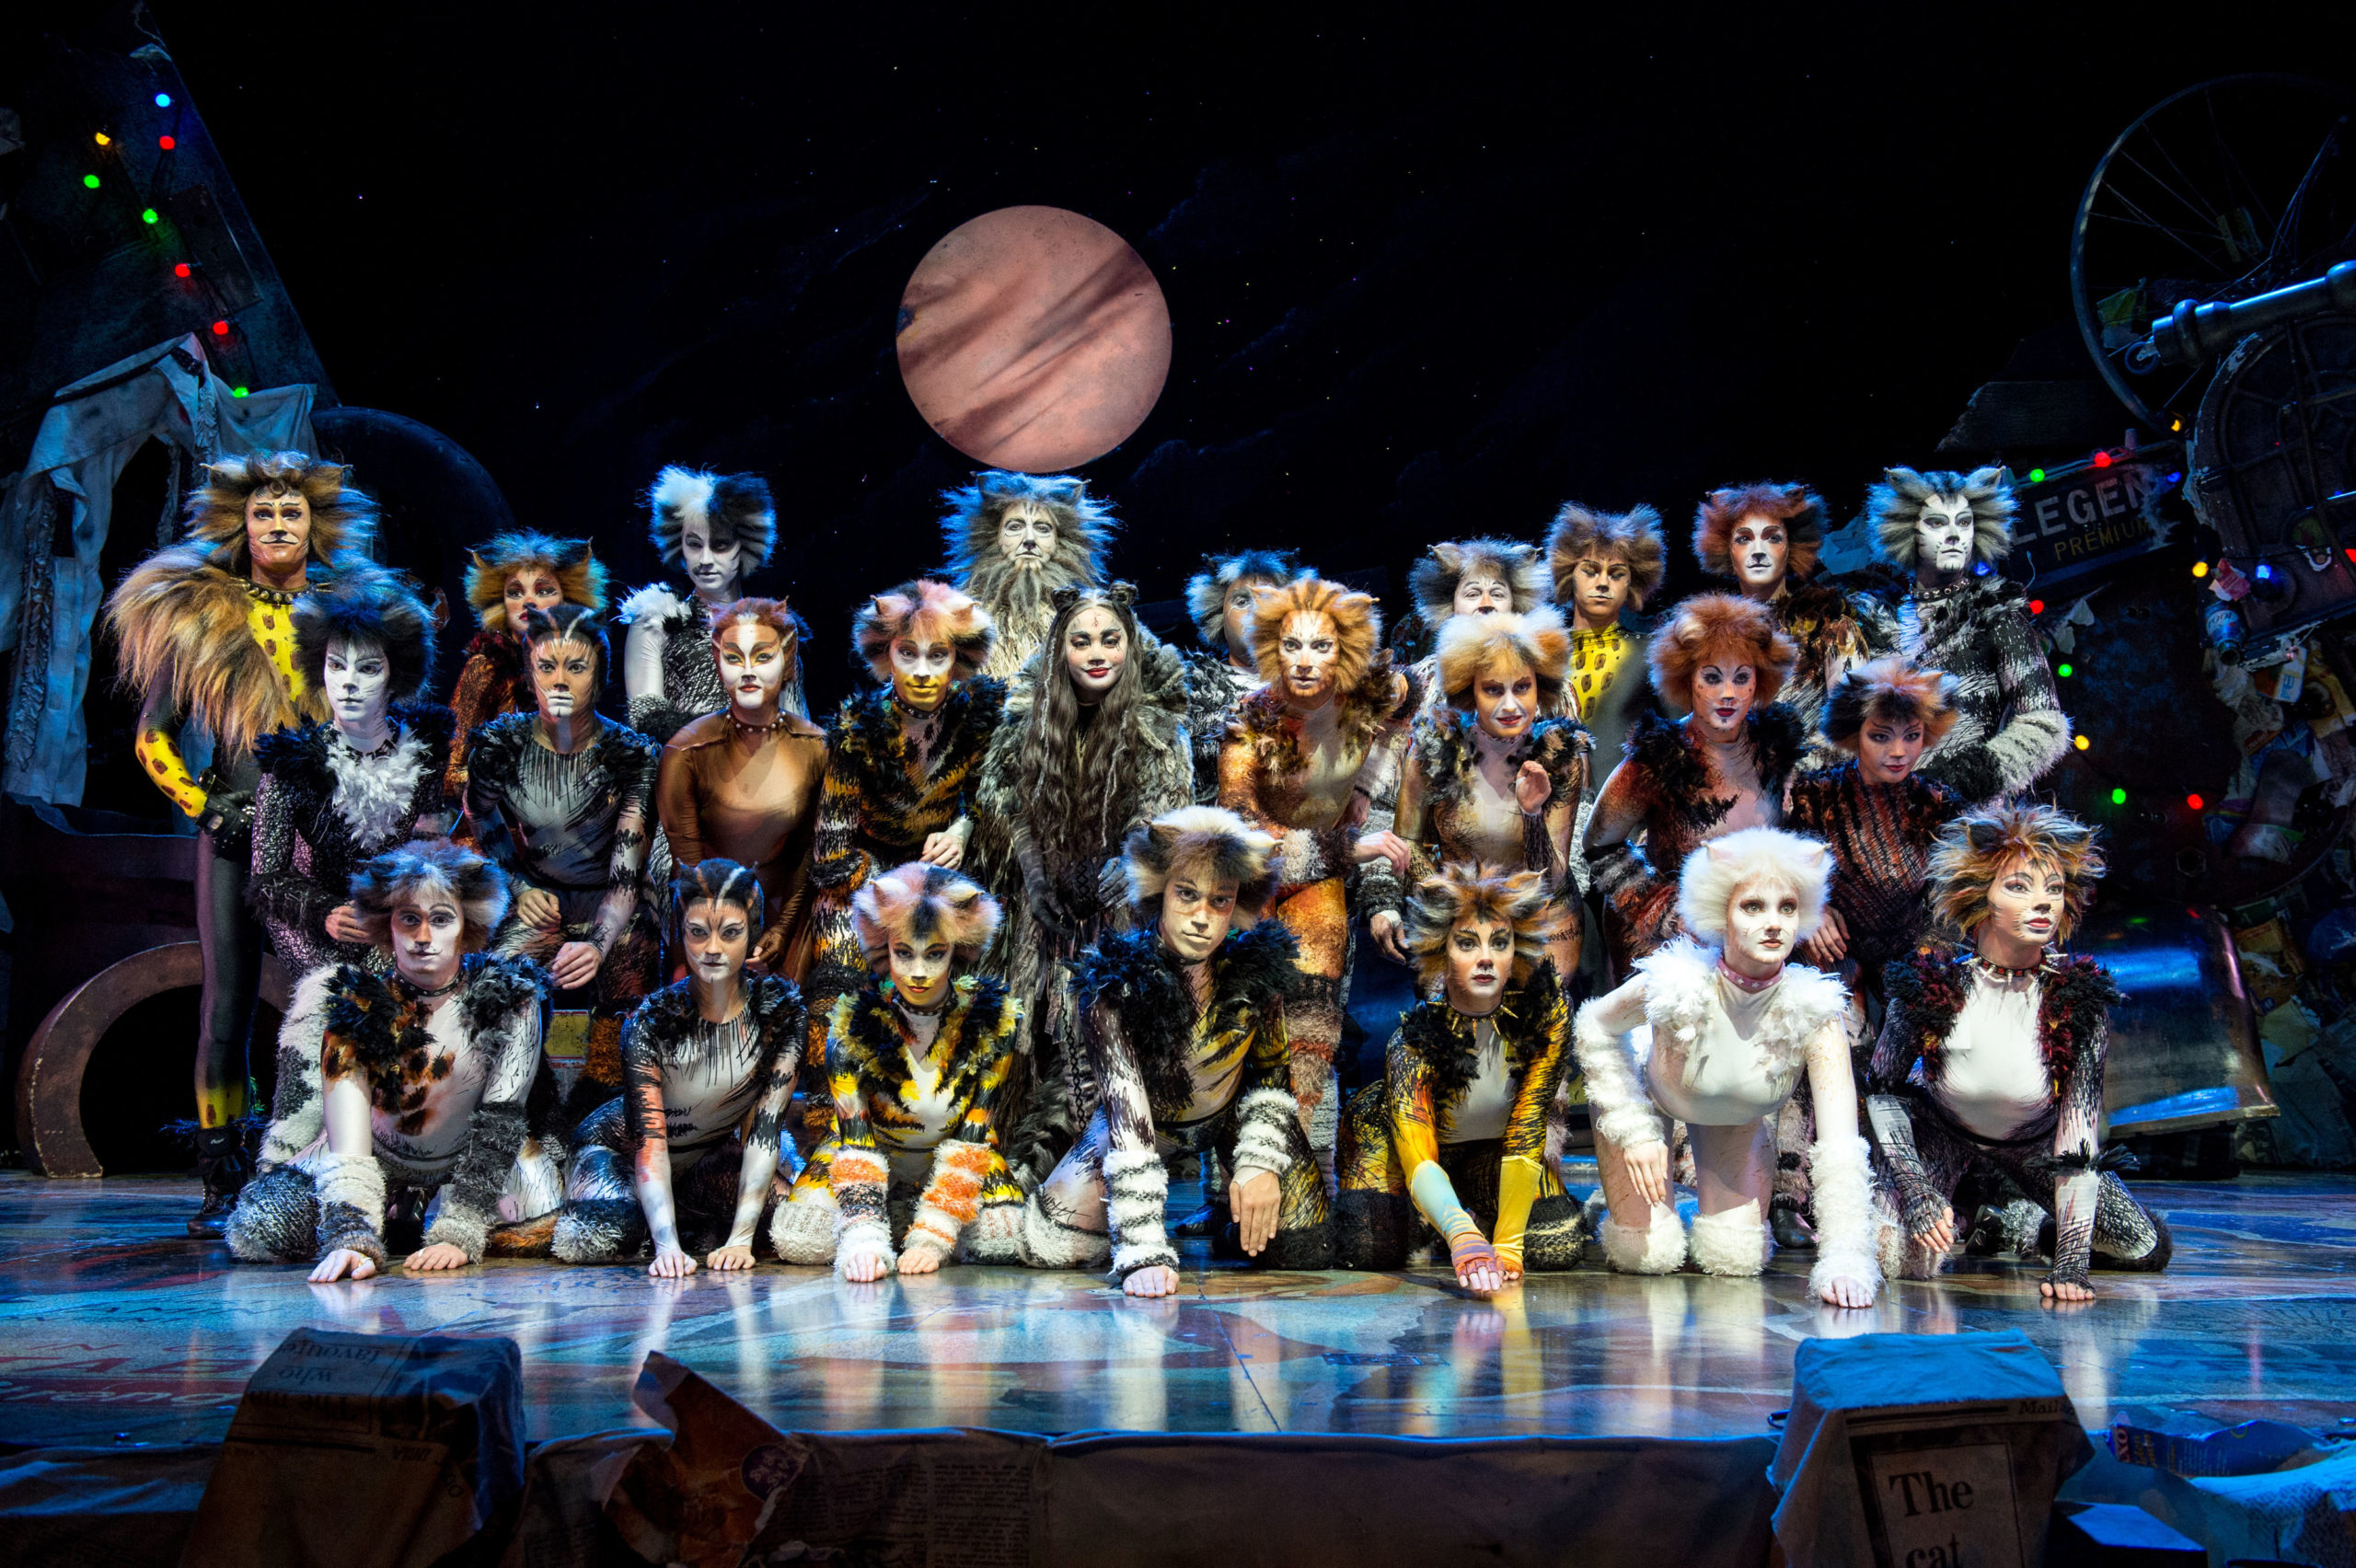 Cats the musical opens in Hong Kong's Lyric theatre